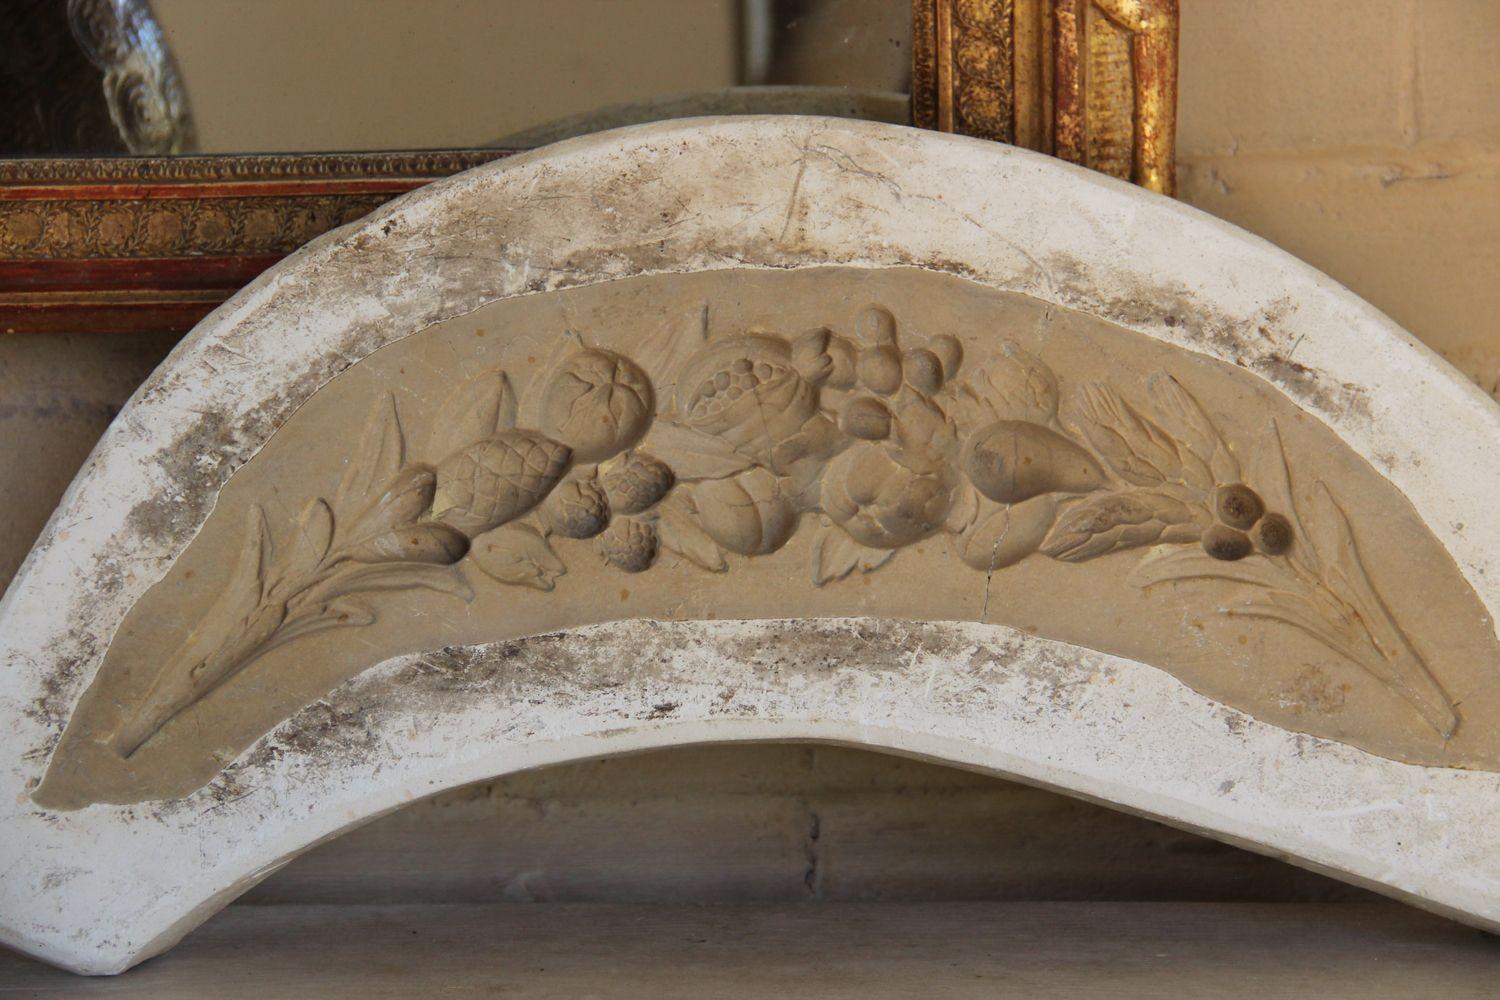 A decorative French plaster mold from the 19th century.

We offer expedited, fully-insured, custom packaged / crated, global shipping, including delivery to the door service, delivery to a receiver service, and white glove service, which includes